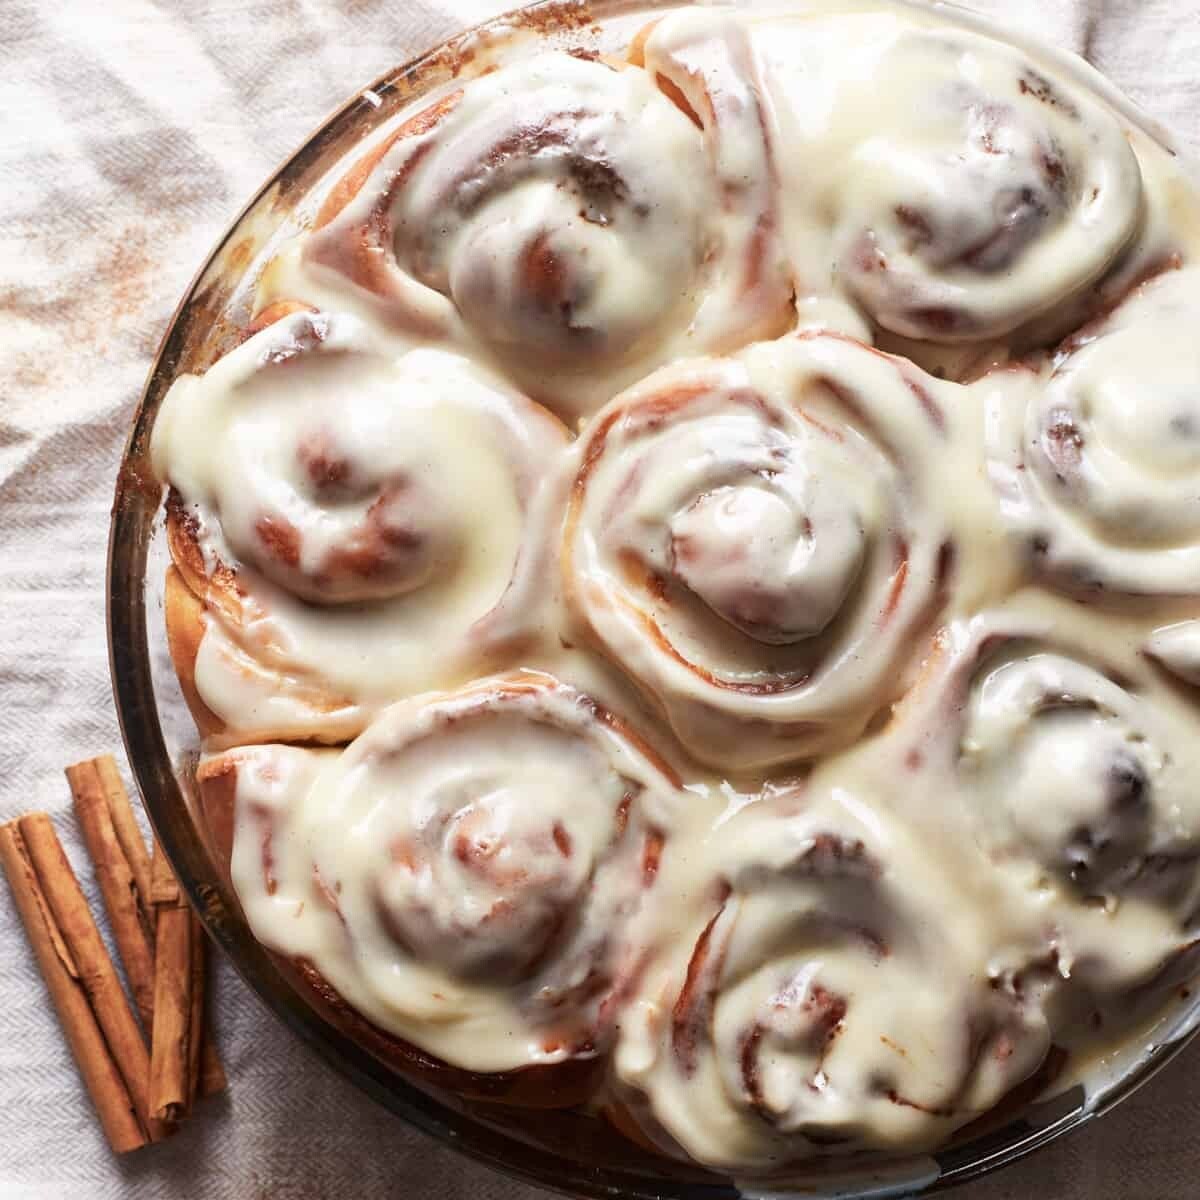 "You Can Make Gluten Free!"
In-Person Group Baking Class: Mastering Cinnamon Rolls